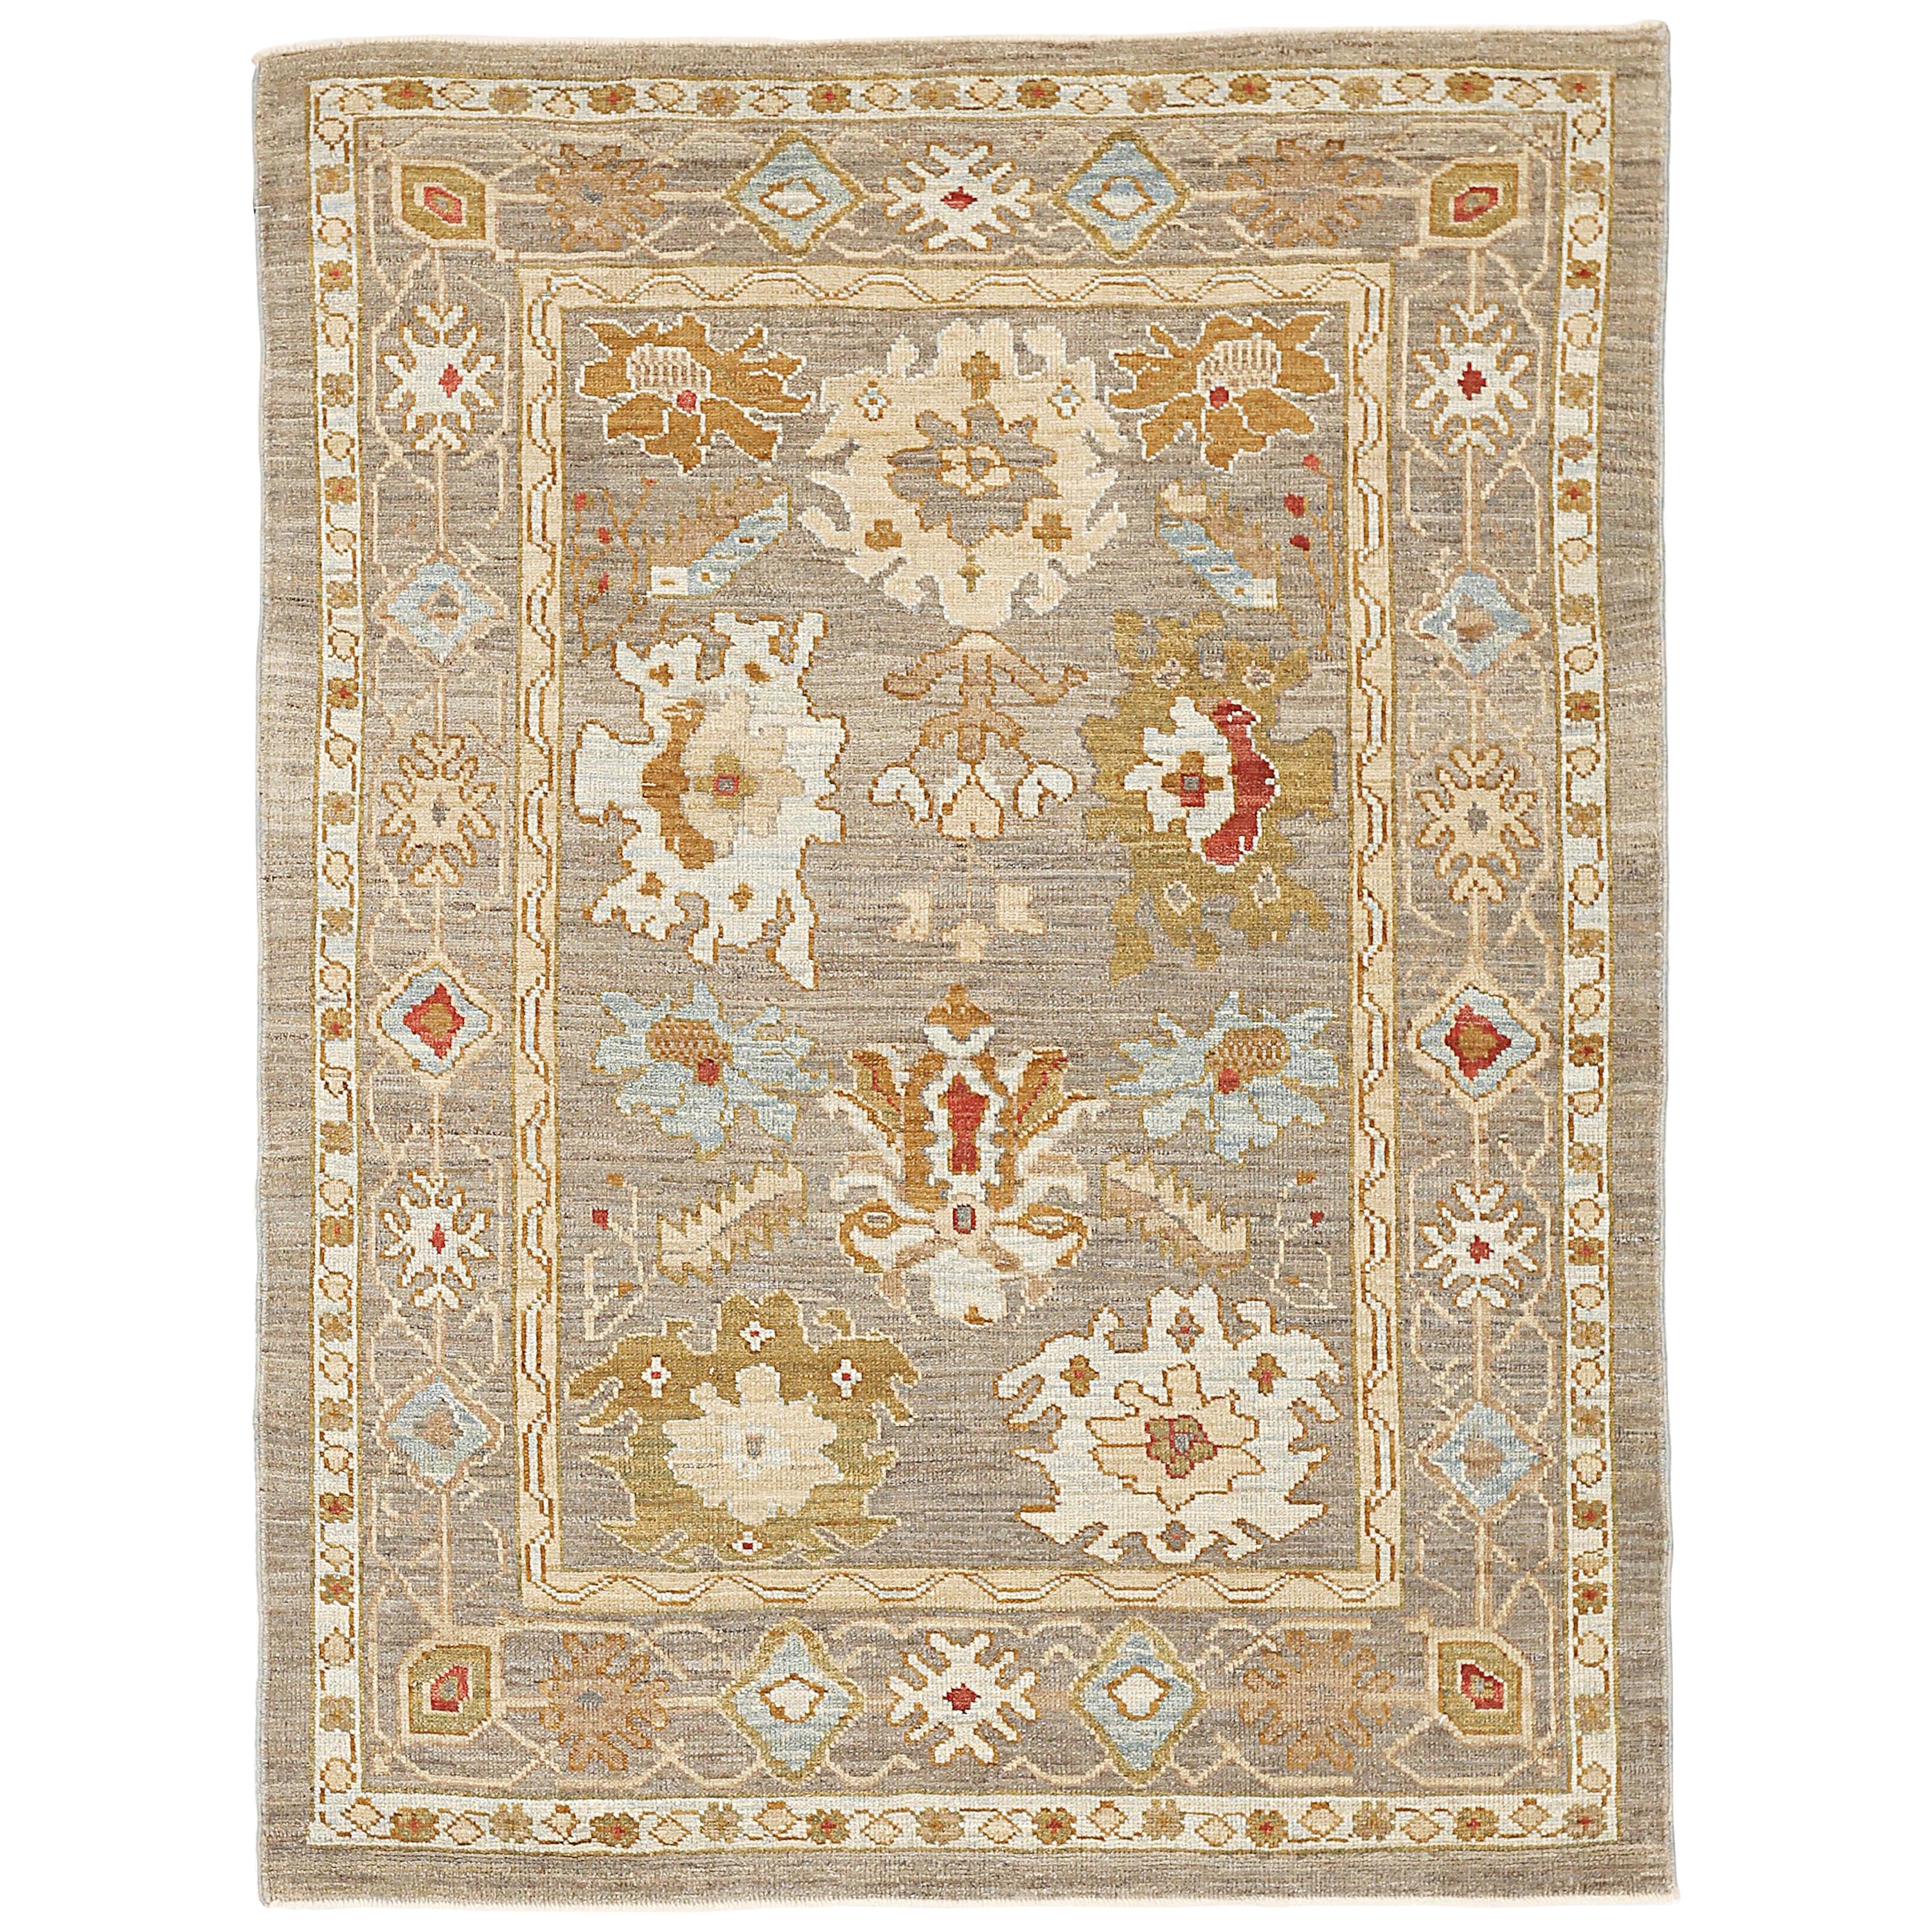 Contemporary Turkish Oushak Rug with Red & Brown Floral Motifs on Gray Field